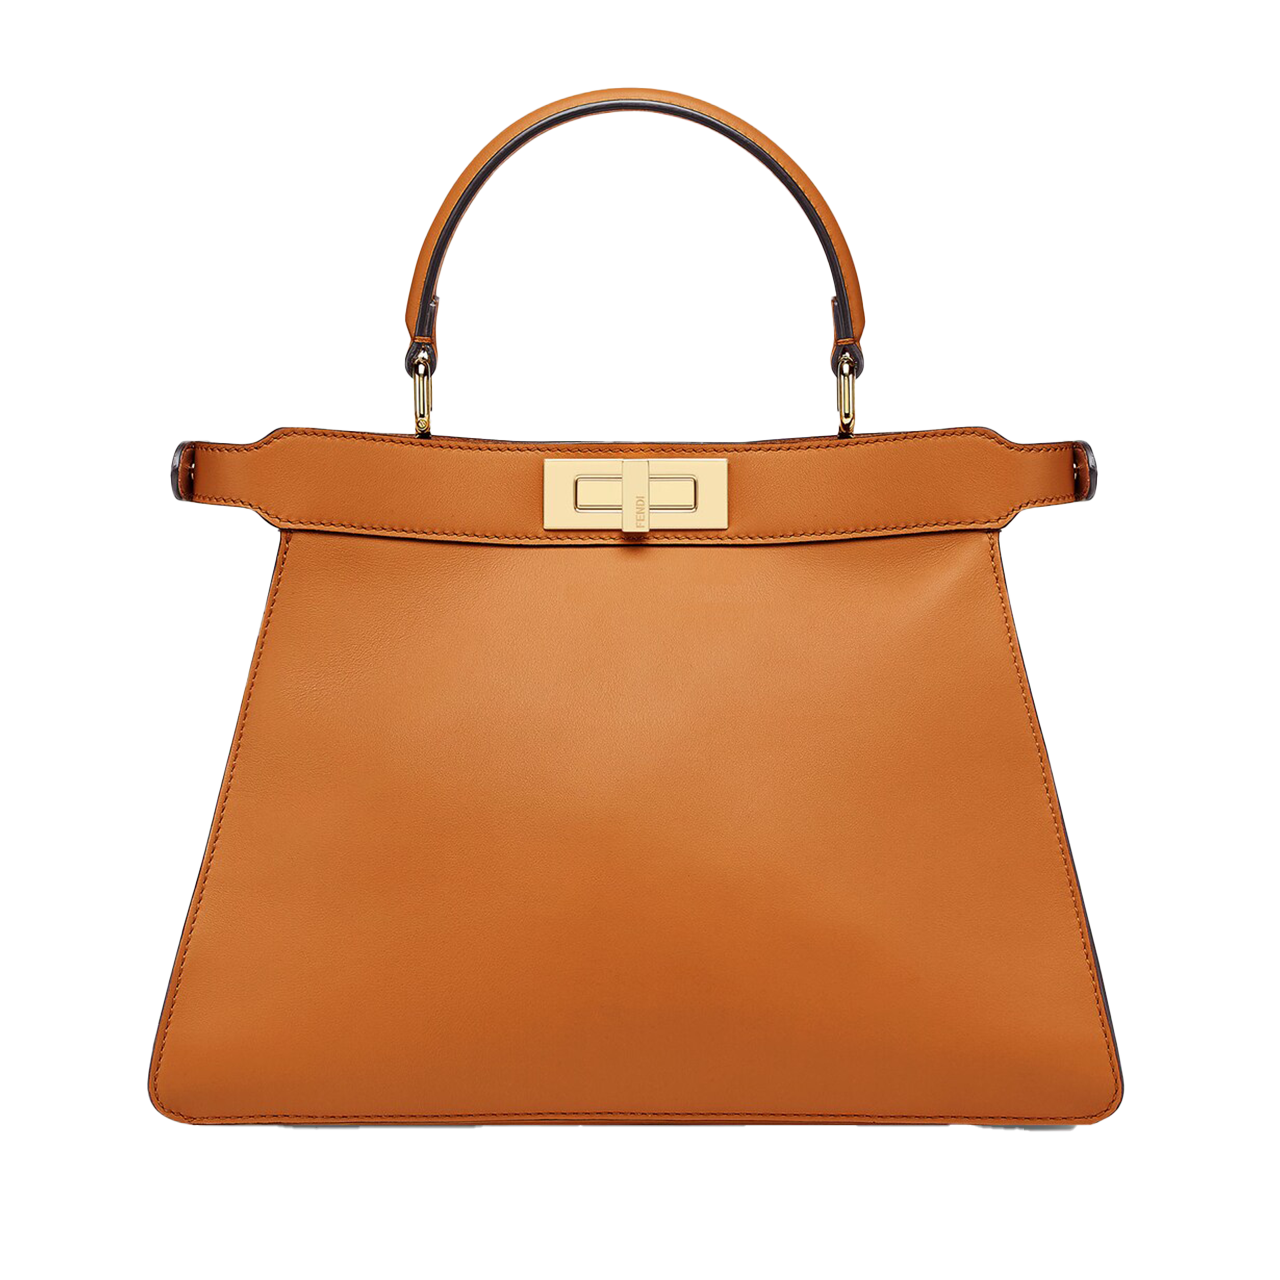 Best Valentine's Day Gift For The Sophisticated Sweetheart - A Moynat Tote  Exclusive to Paris